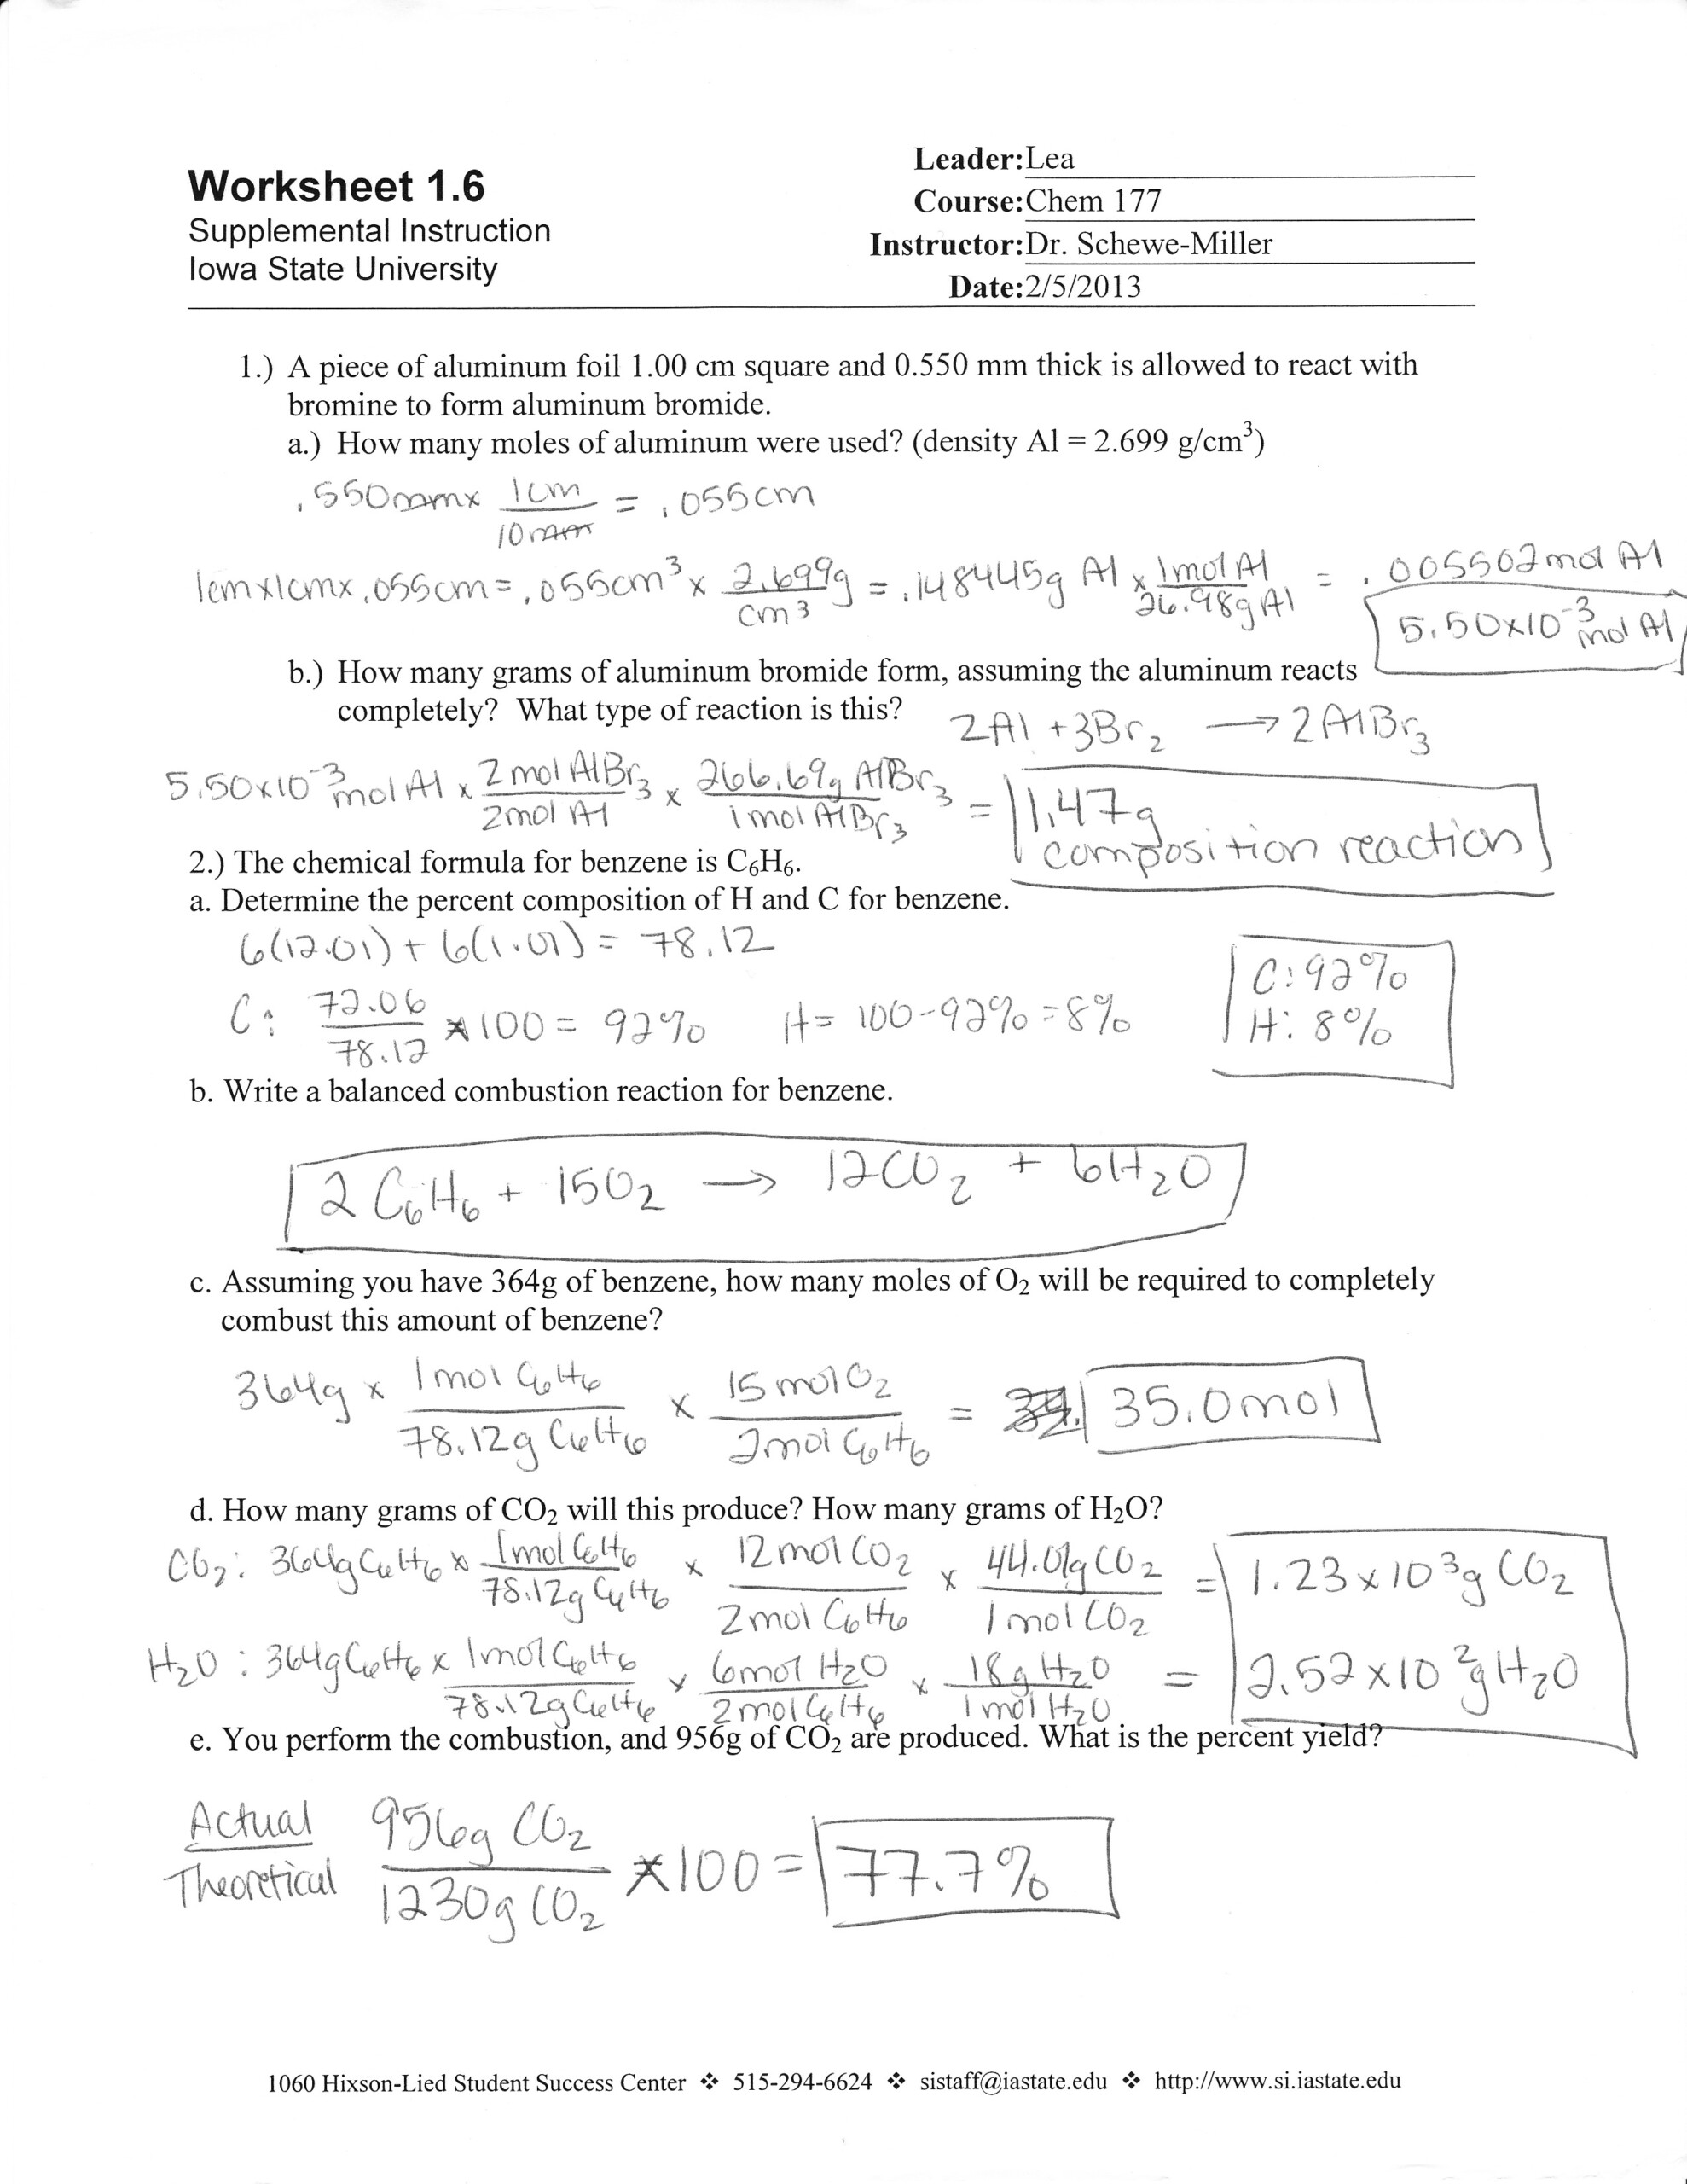 Thermochemistry Review Worksheet Key Free Download Qstion co